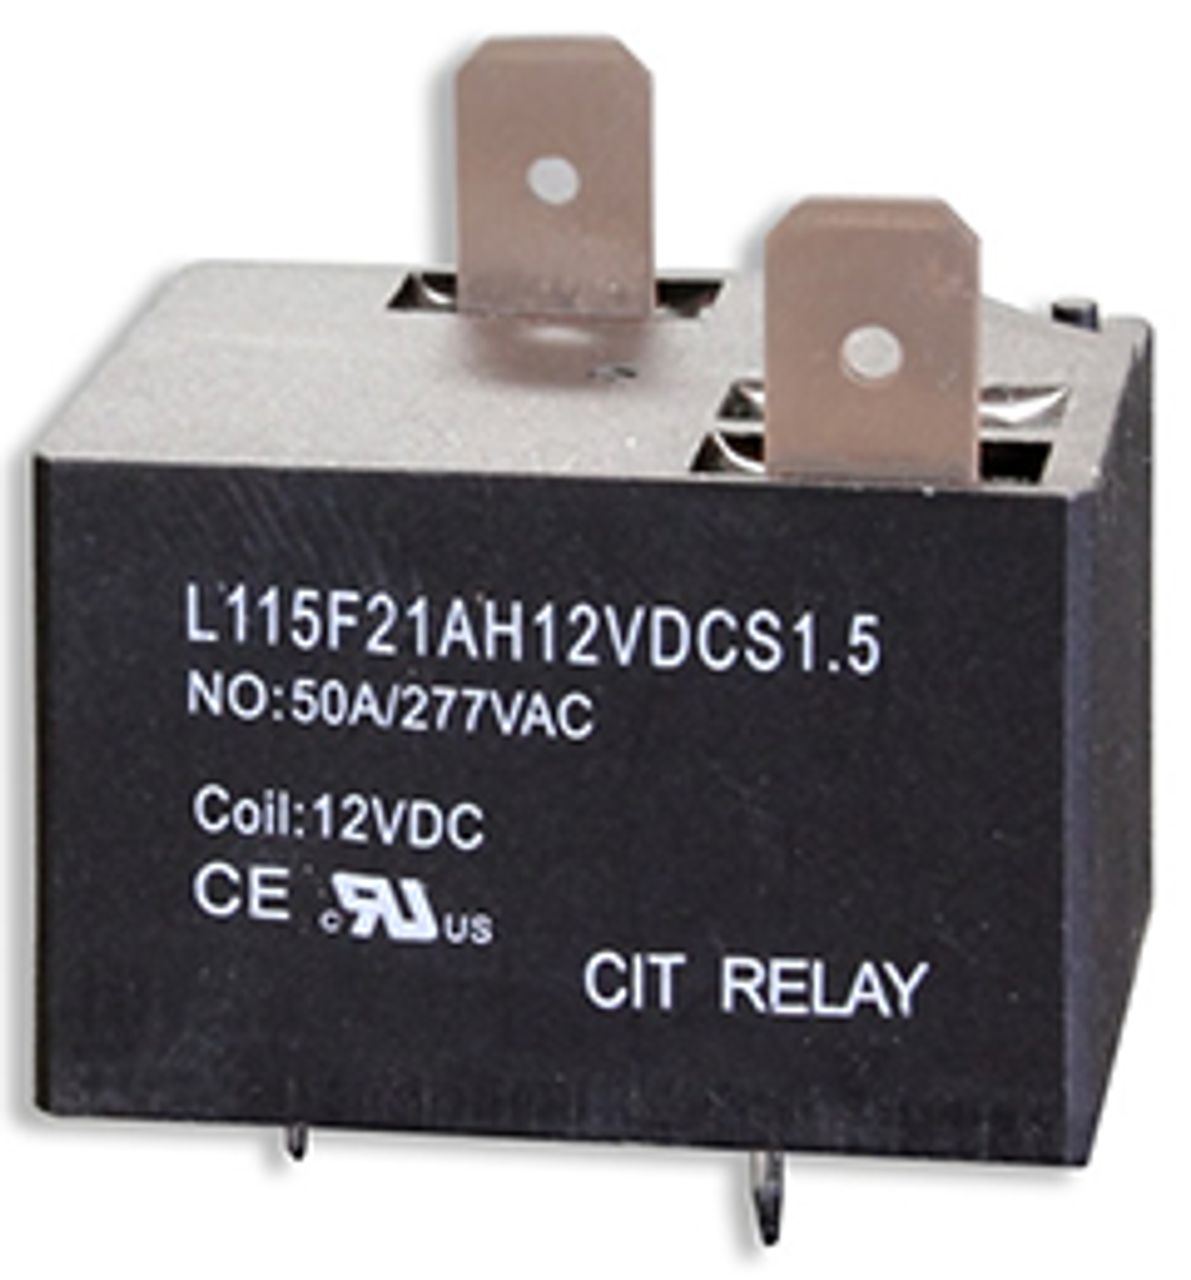 CIT Relay and Switch L115F21AH12VDCS1.5 Latching Relays